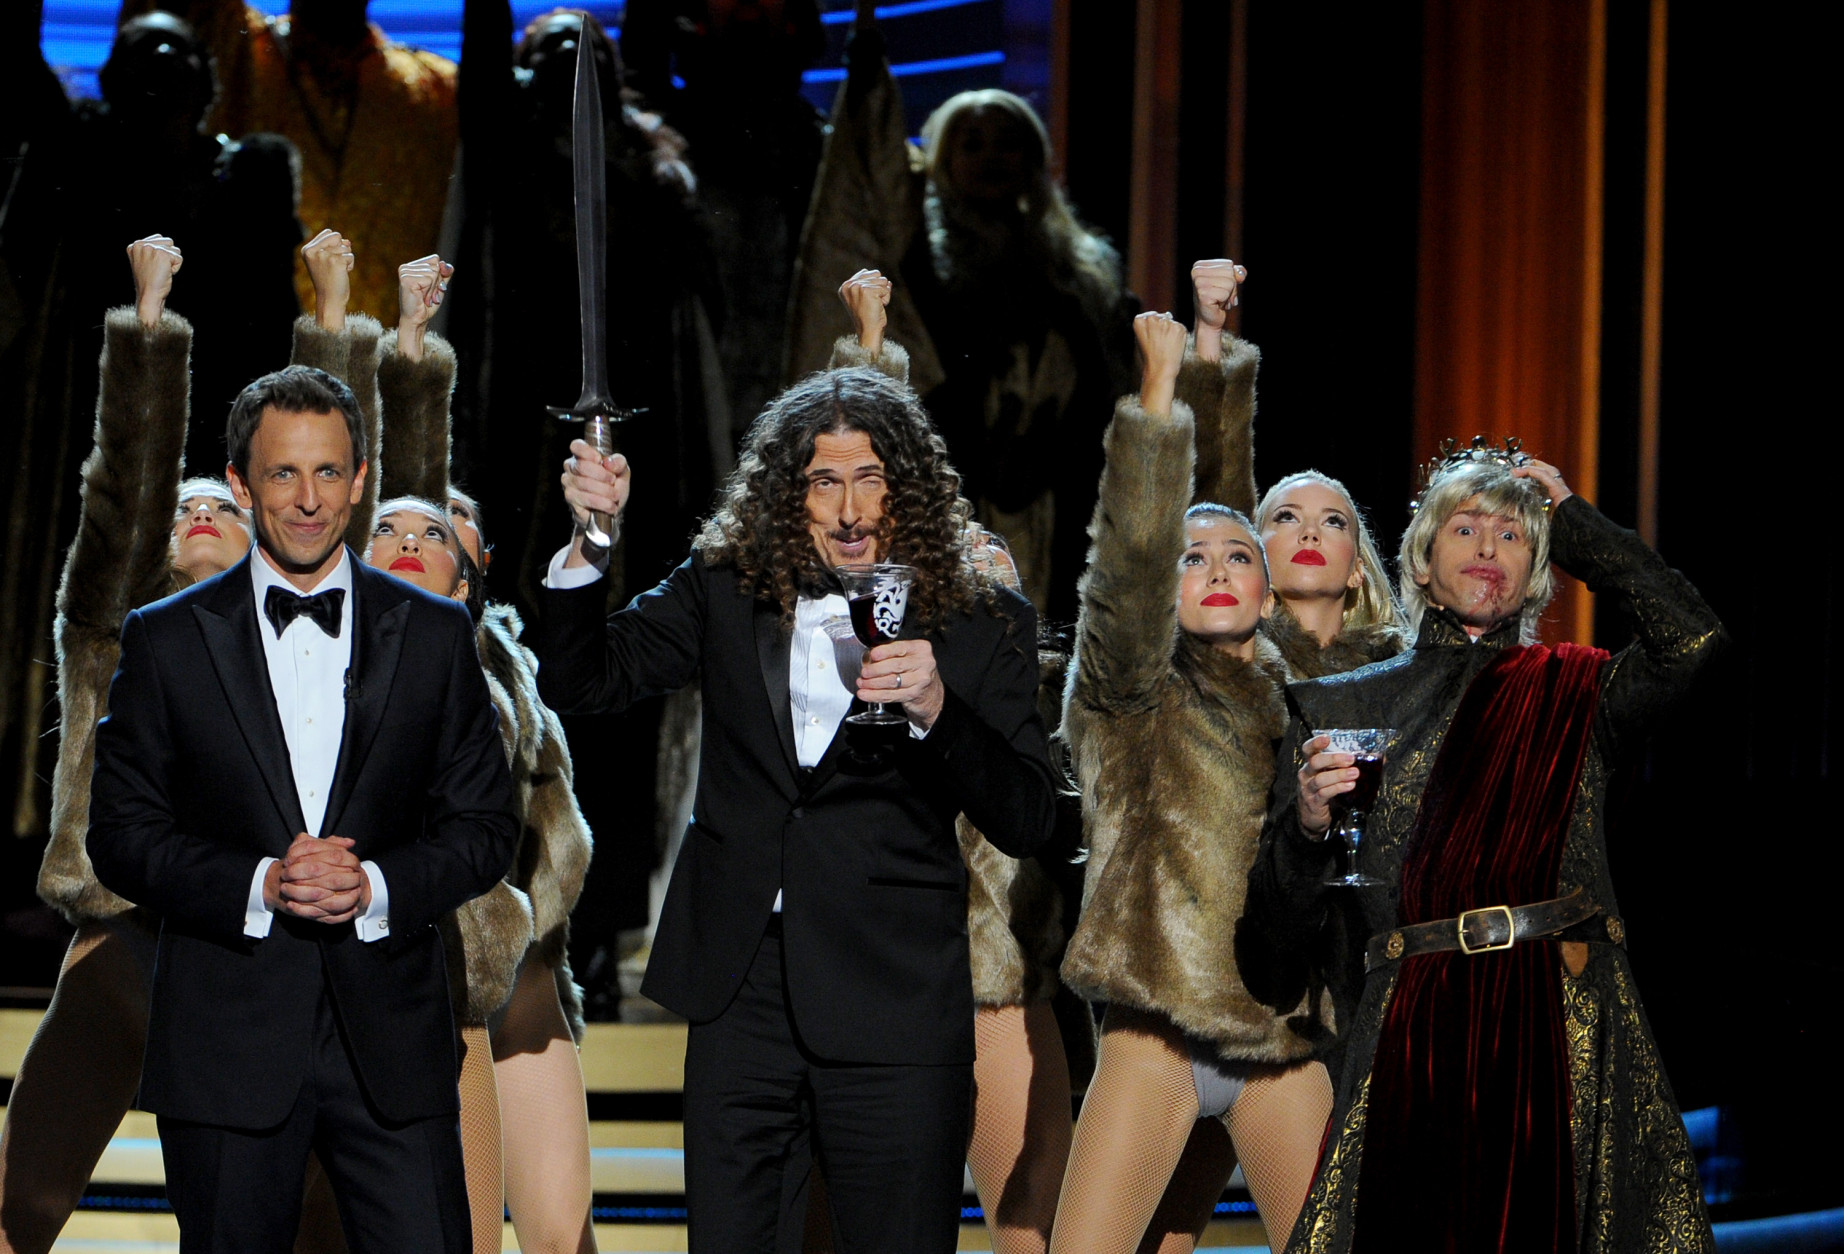 Seth Meyers, and from left, Weird Al Yankovic and Andy Samberg perform on stage at the 66th Primetime Emmy Awards at the Nokia Theatre L.A. Live on Monday, Aug. 25, 2014, in Los Angeles. (Photo by Vince Bucci/Invision for the Television Academy/AP Images)